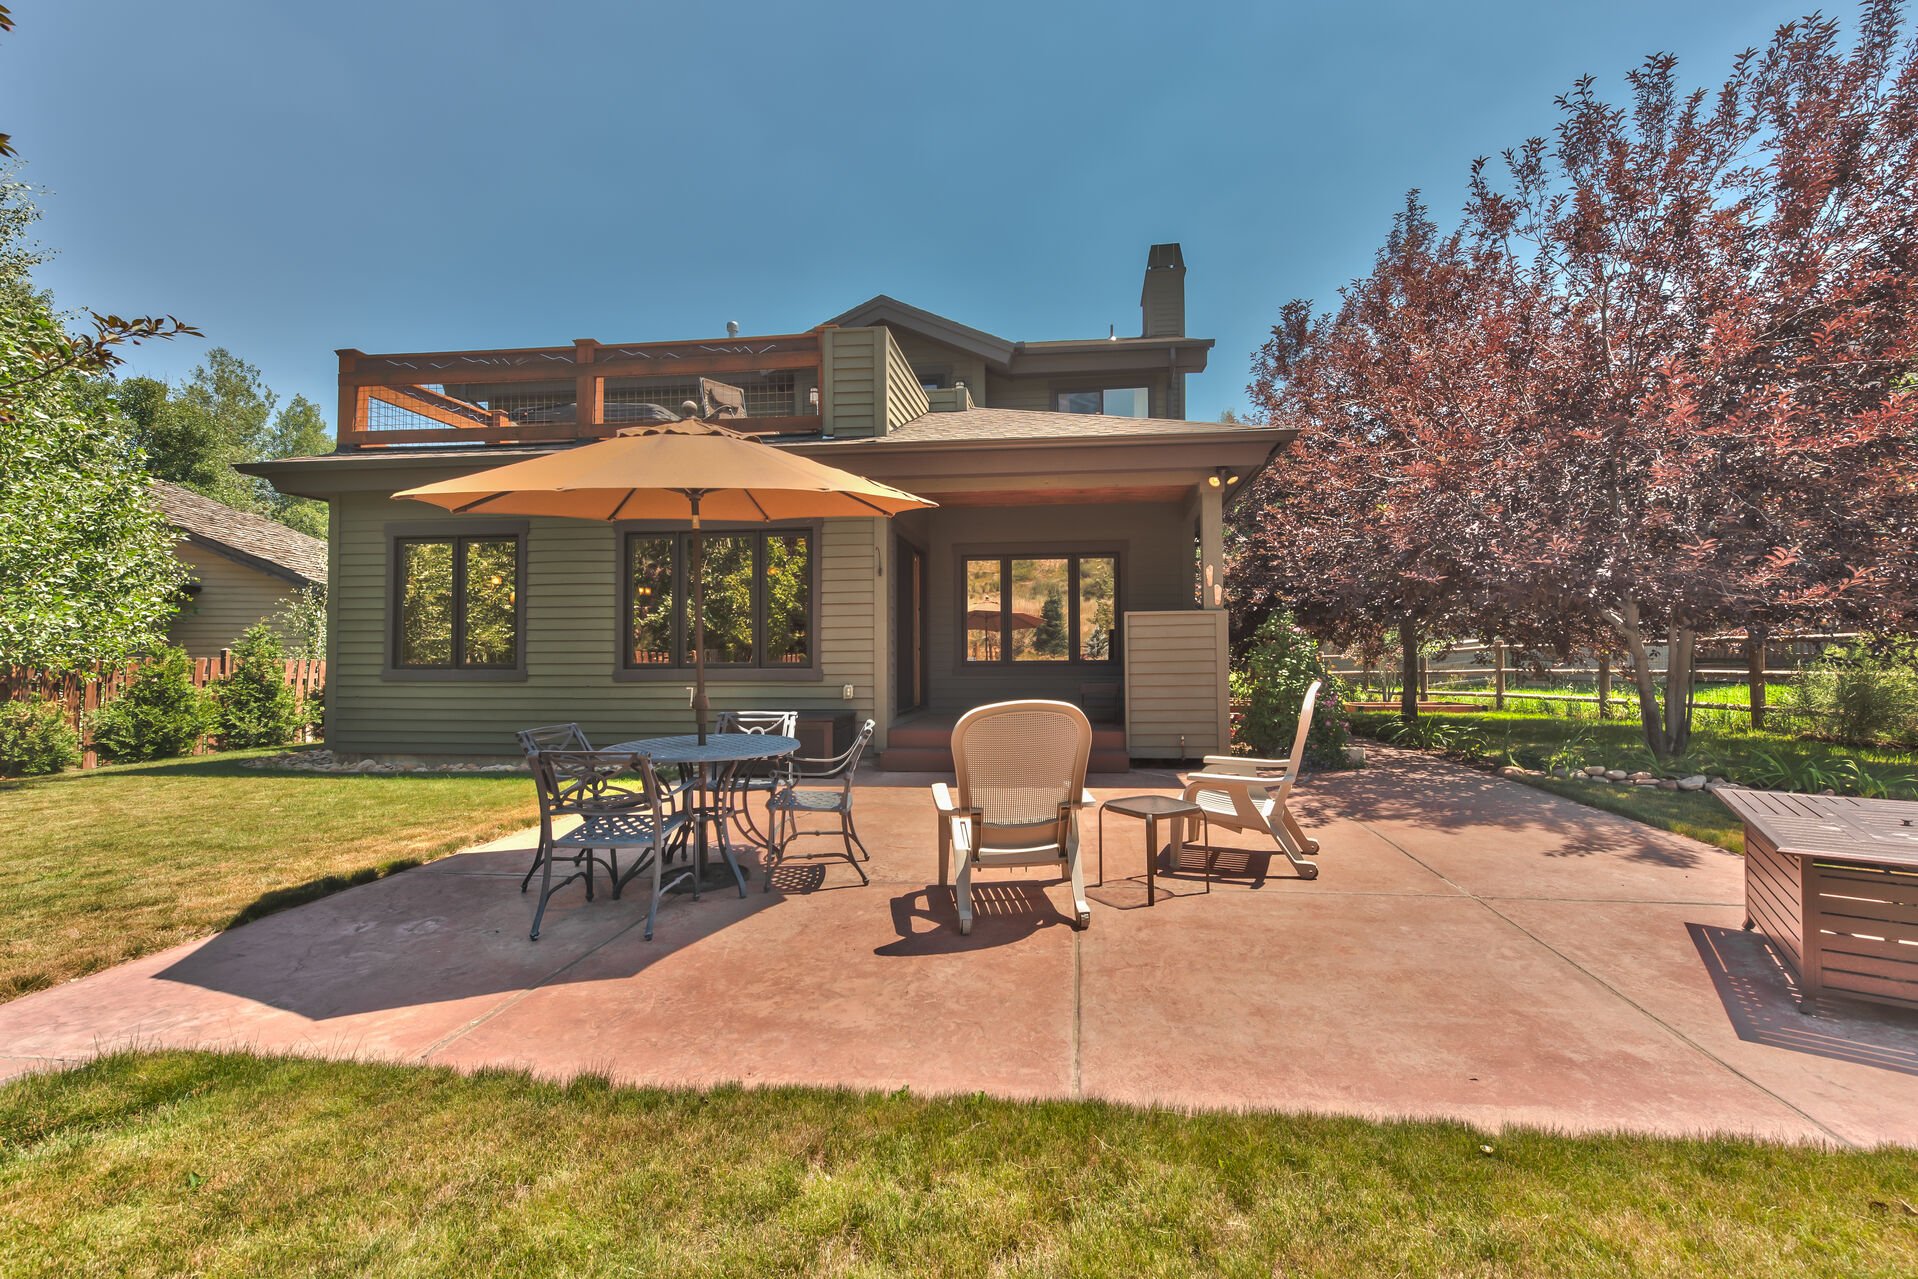 Backyard with Outdoor Dining Set in One of the Long-Term Rentals in Park City.